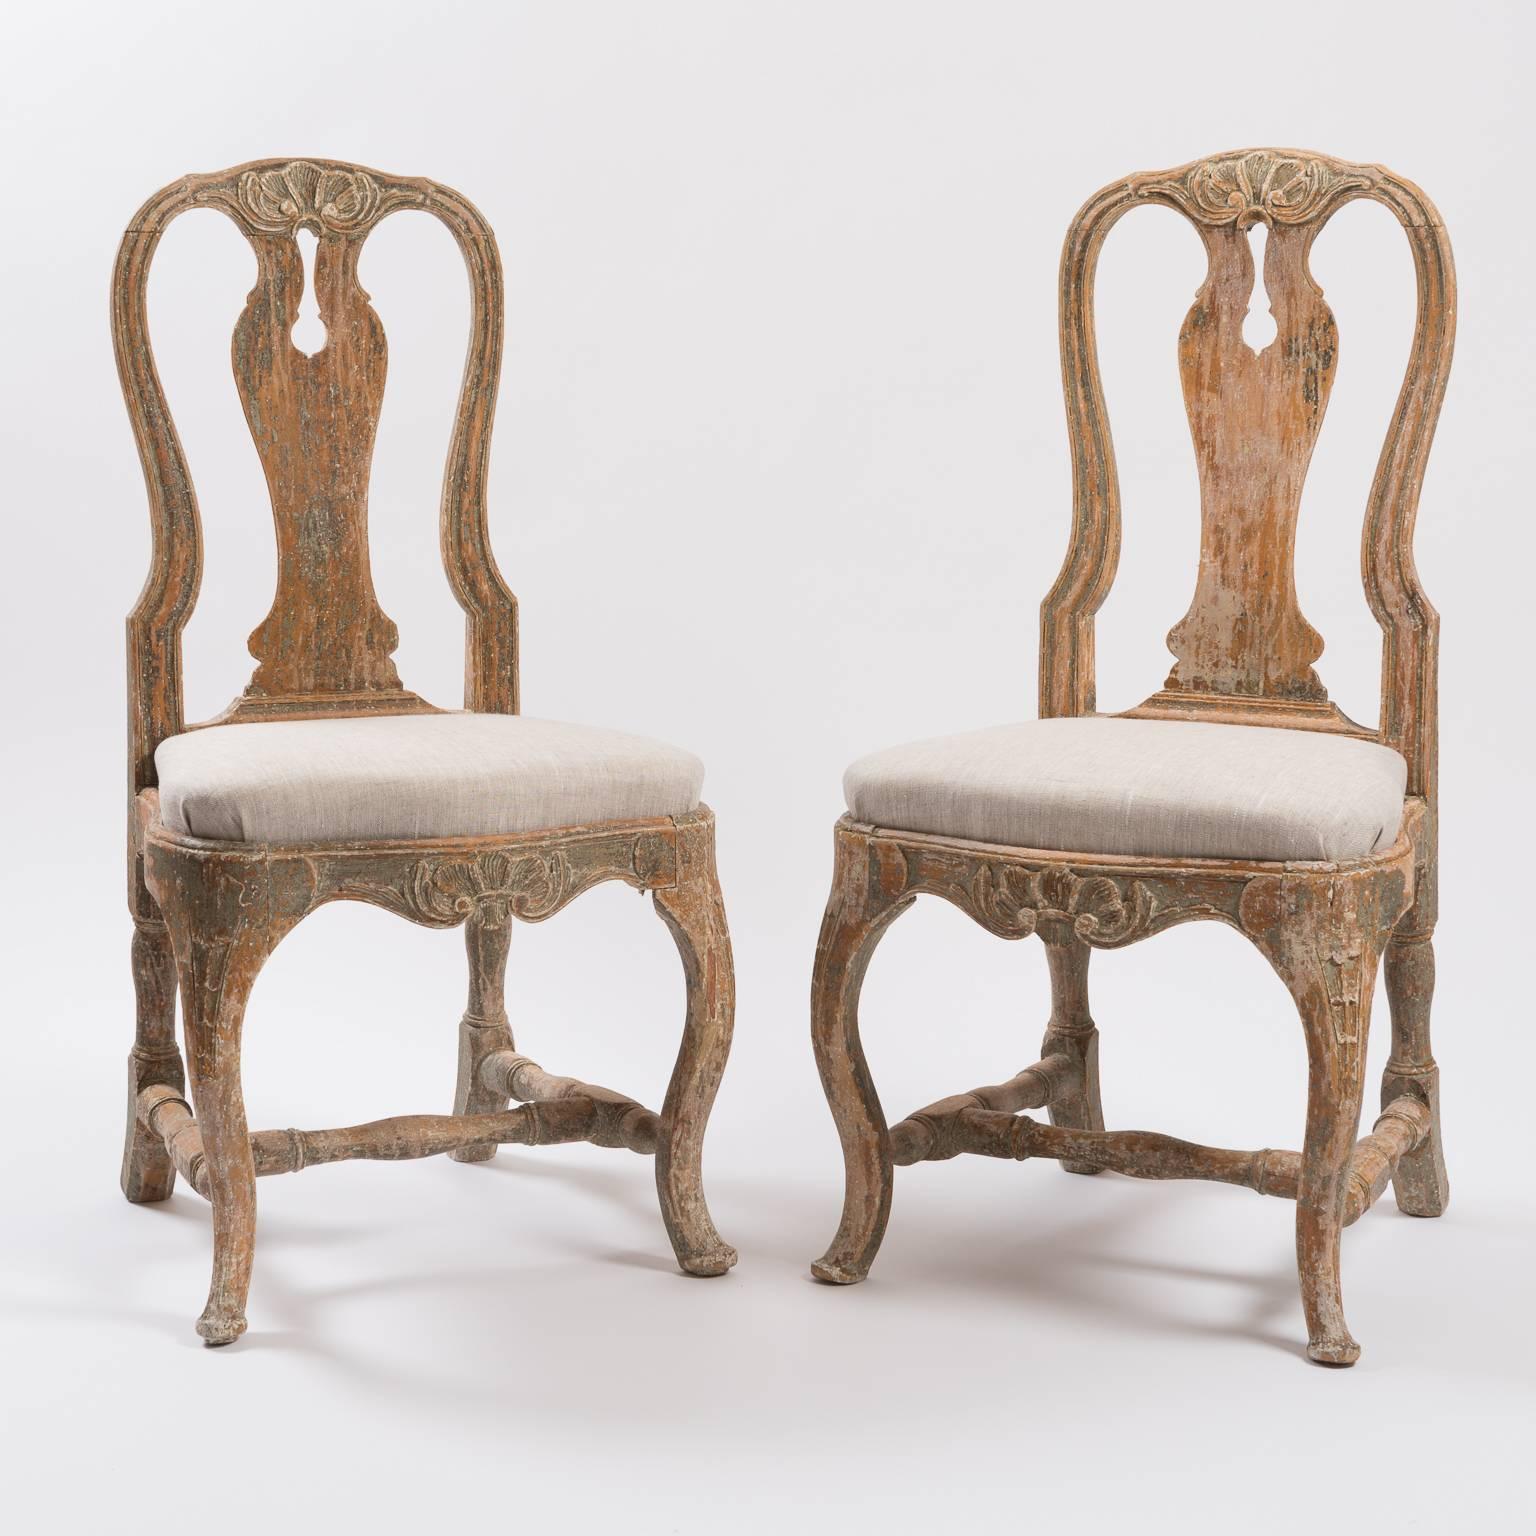 18th Century Swedish Rococo Chairs In Good Condition For Sale In Kramfors, SE